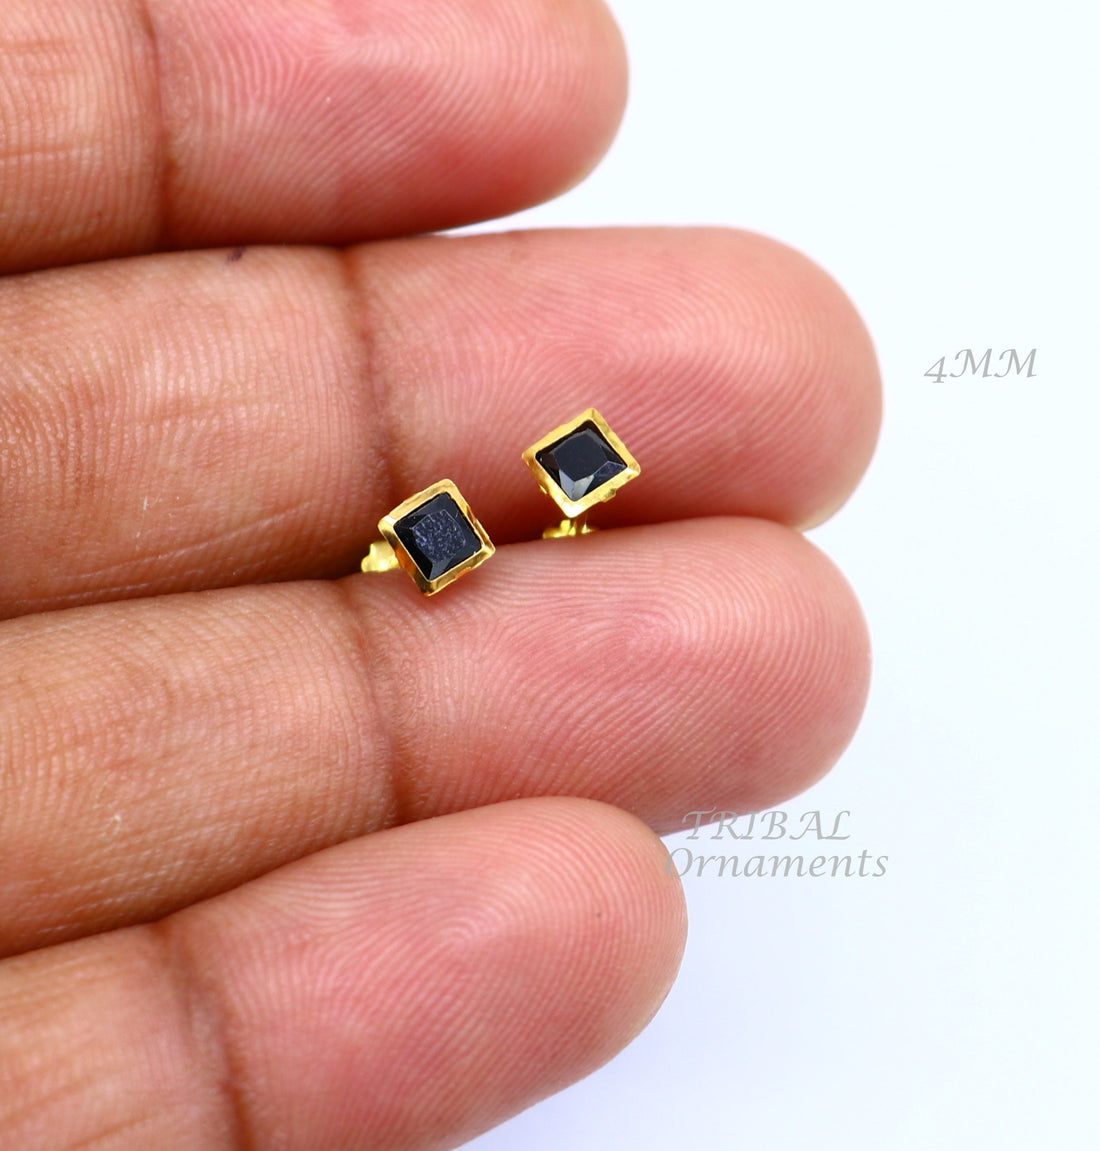 3MM/3.5MM/4MM 18kt yellow gold handmade black stone stud earring, excellent light weight daily use customized gifting unisex jewelry er158 - TRIBAL ORNAMENTS